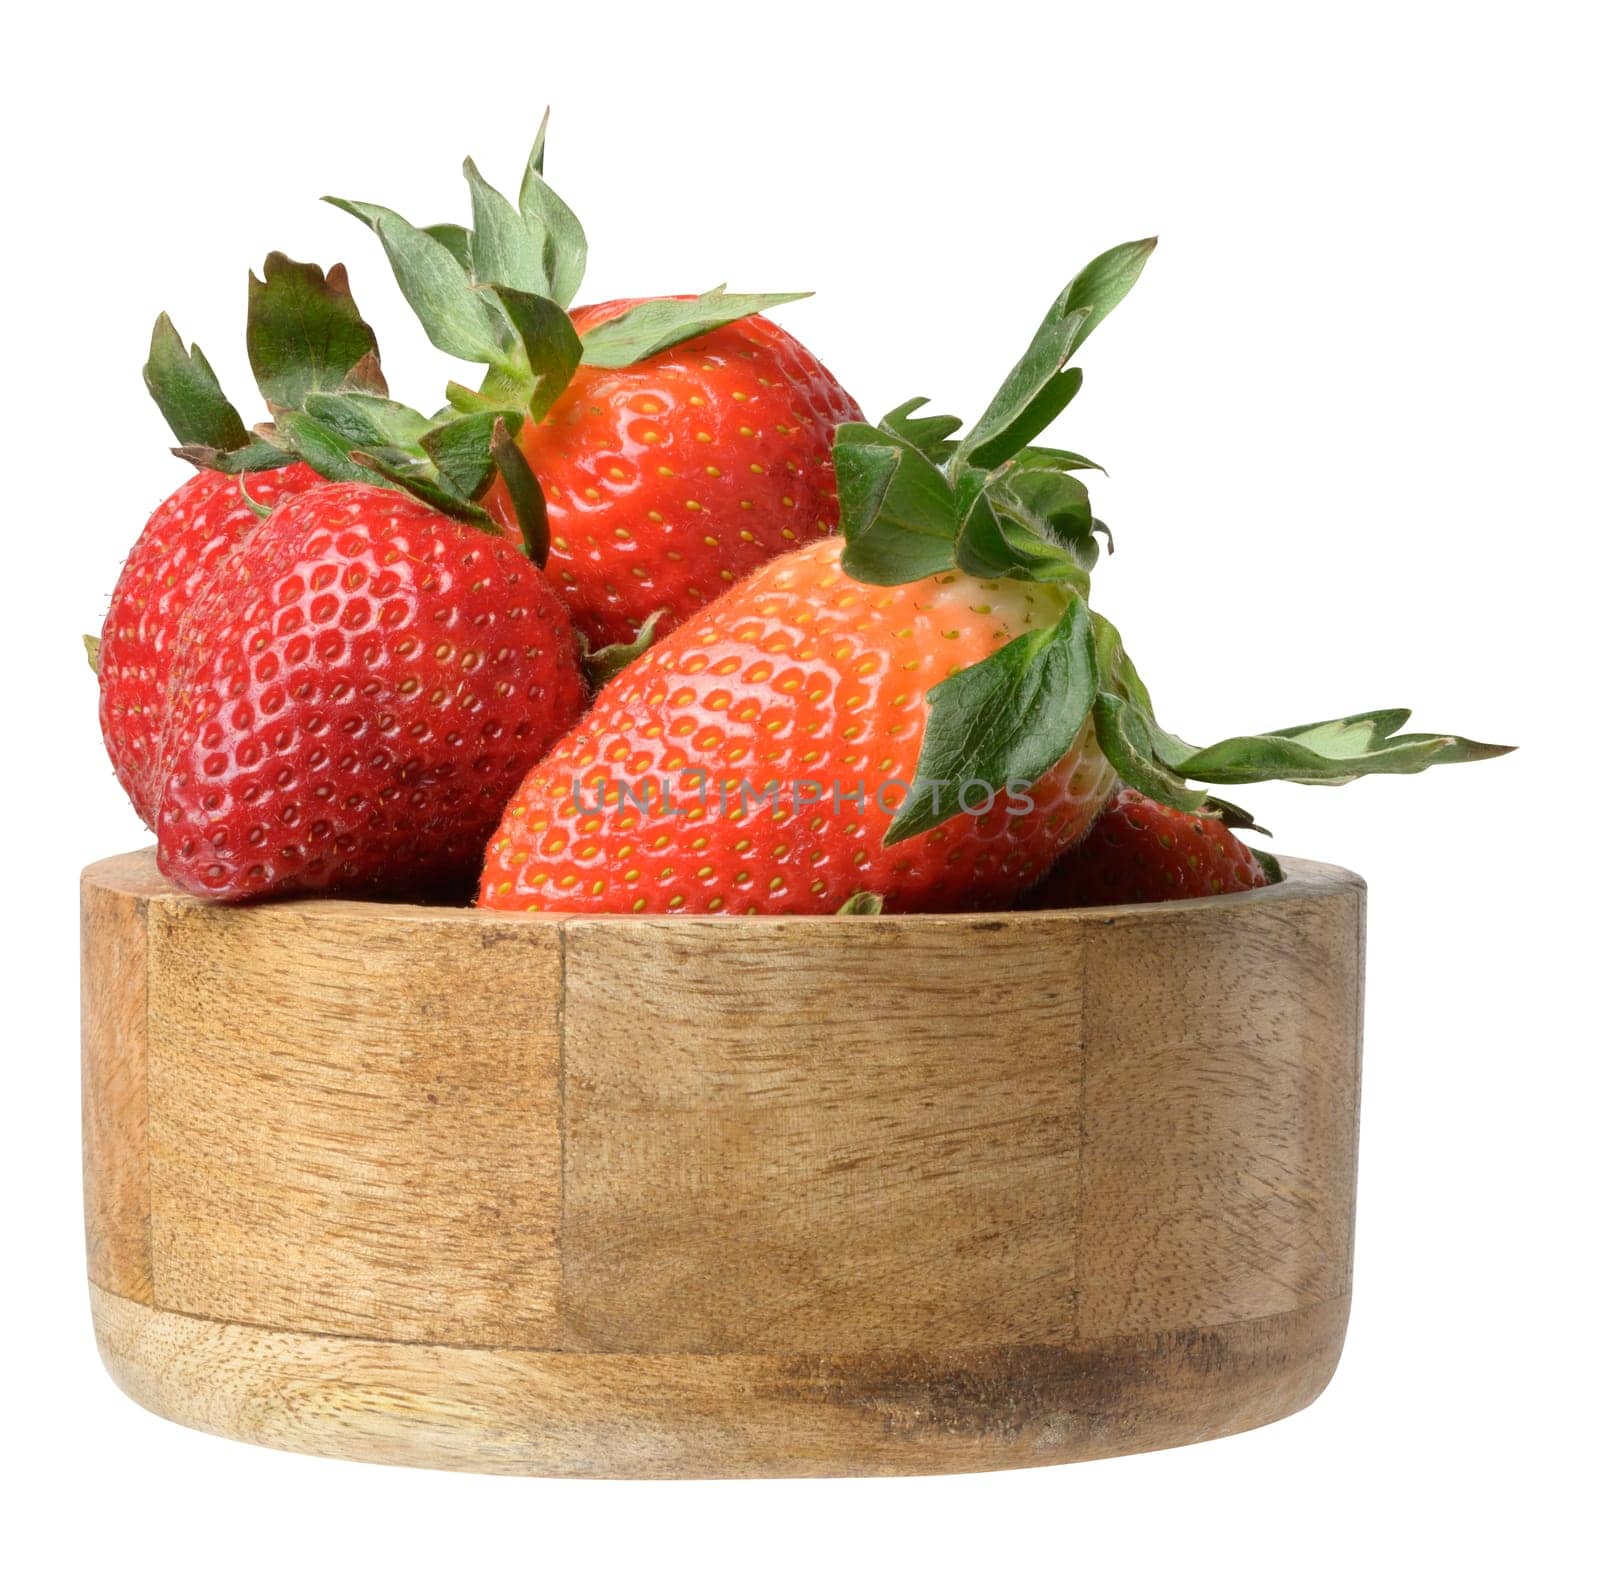 Ripe red strawberries in a wooden bowl on an isolated background